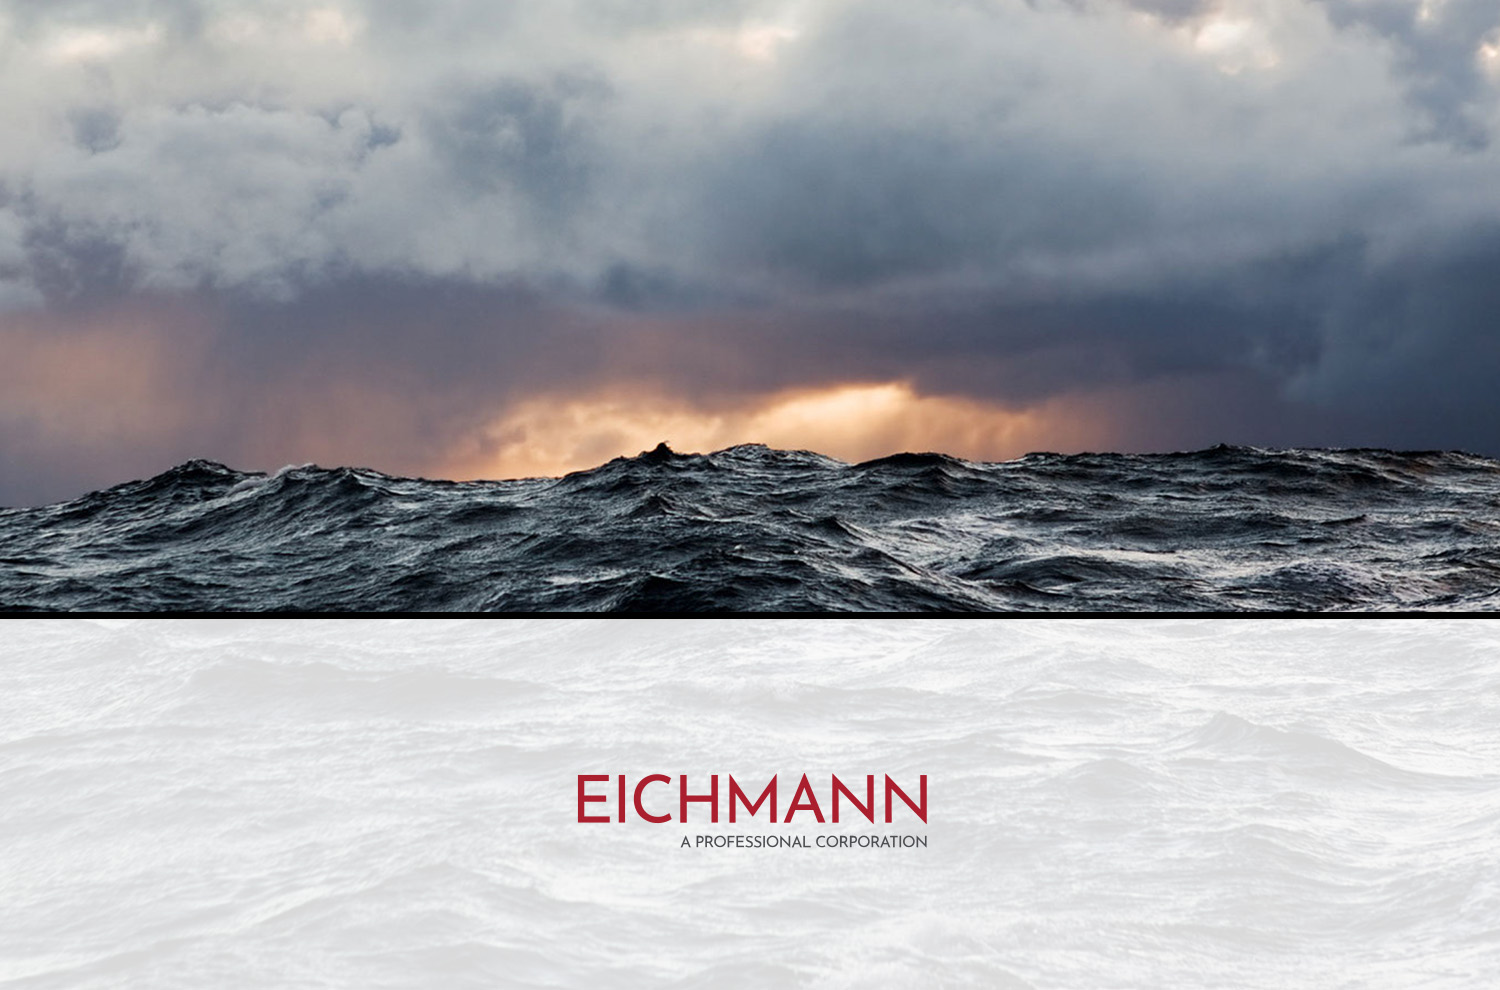 Image collage featuring a view of the sea with the sun shining through and a logo for Eichmann